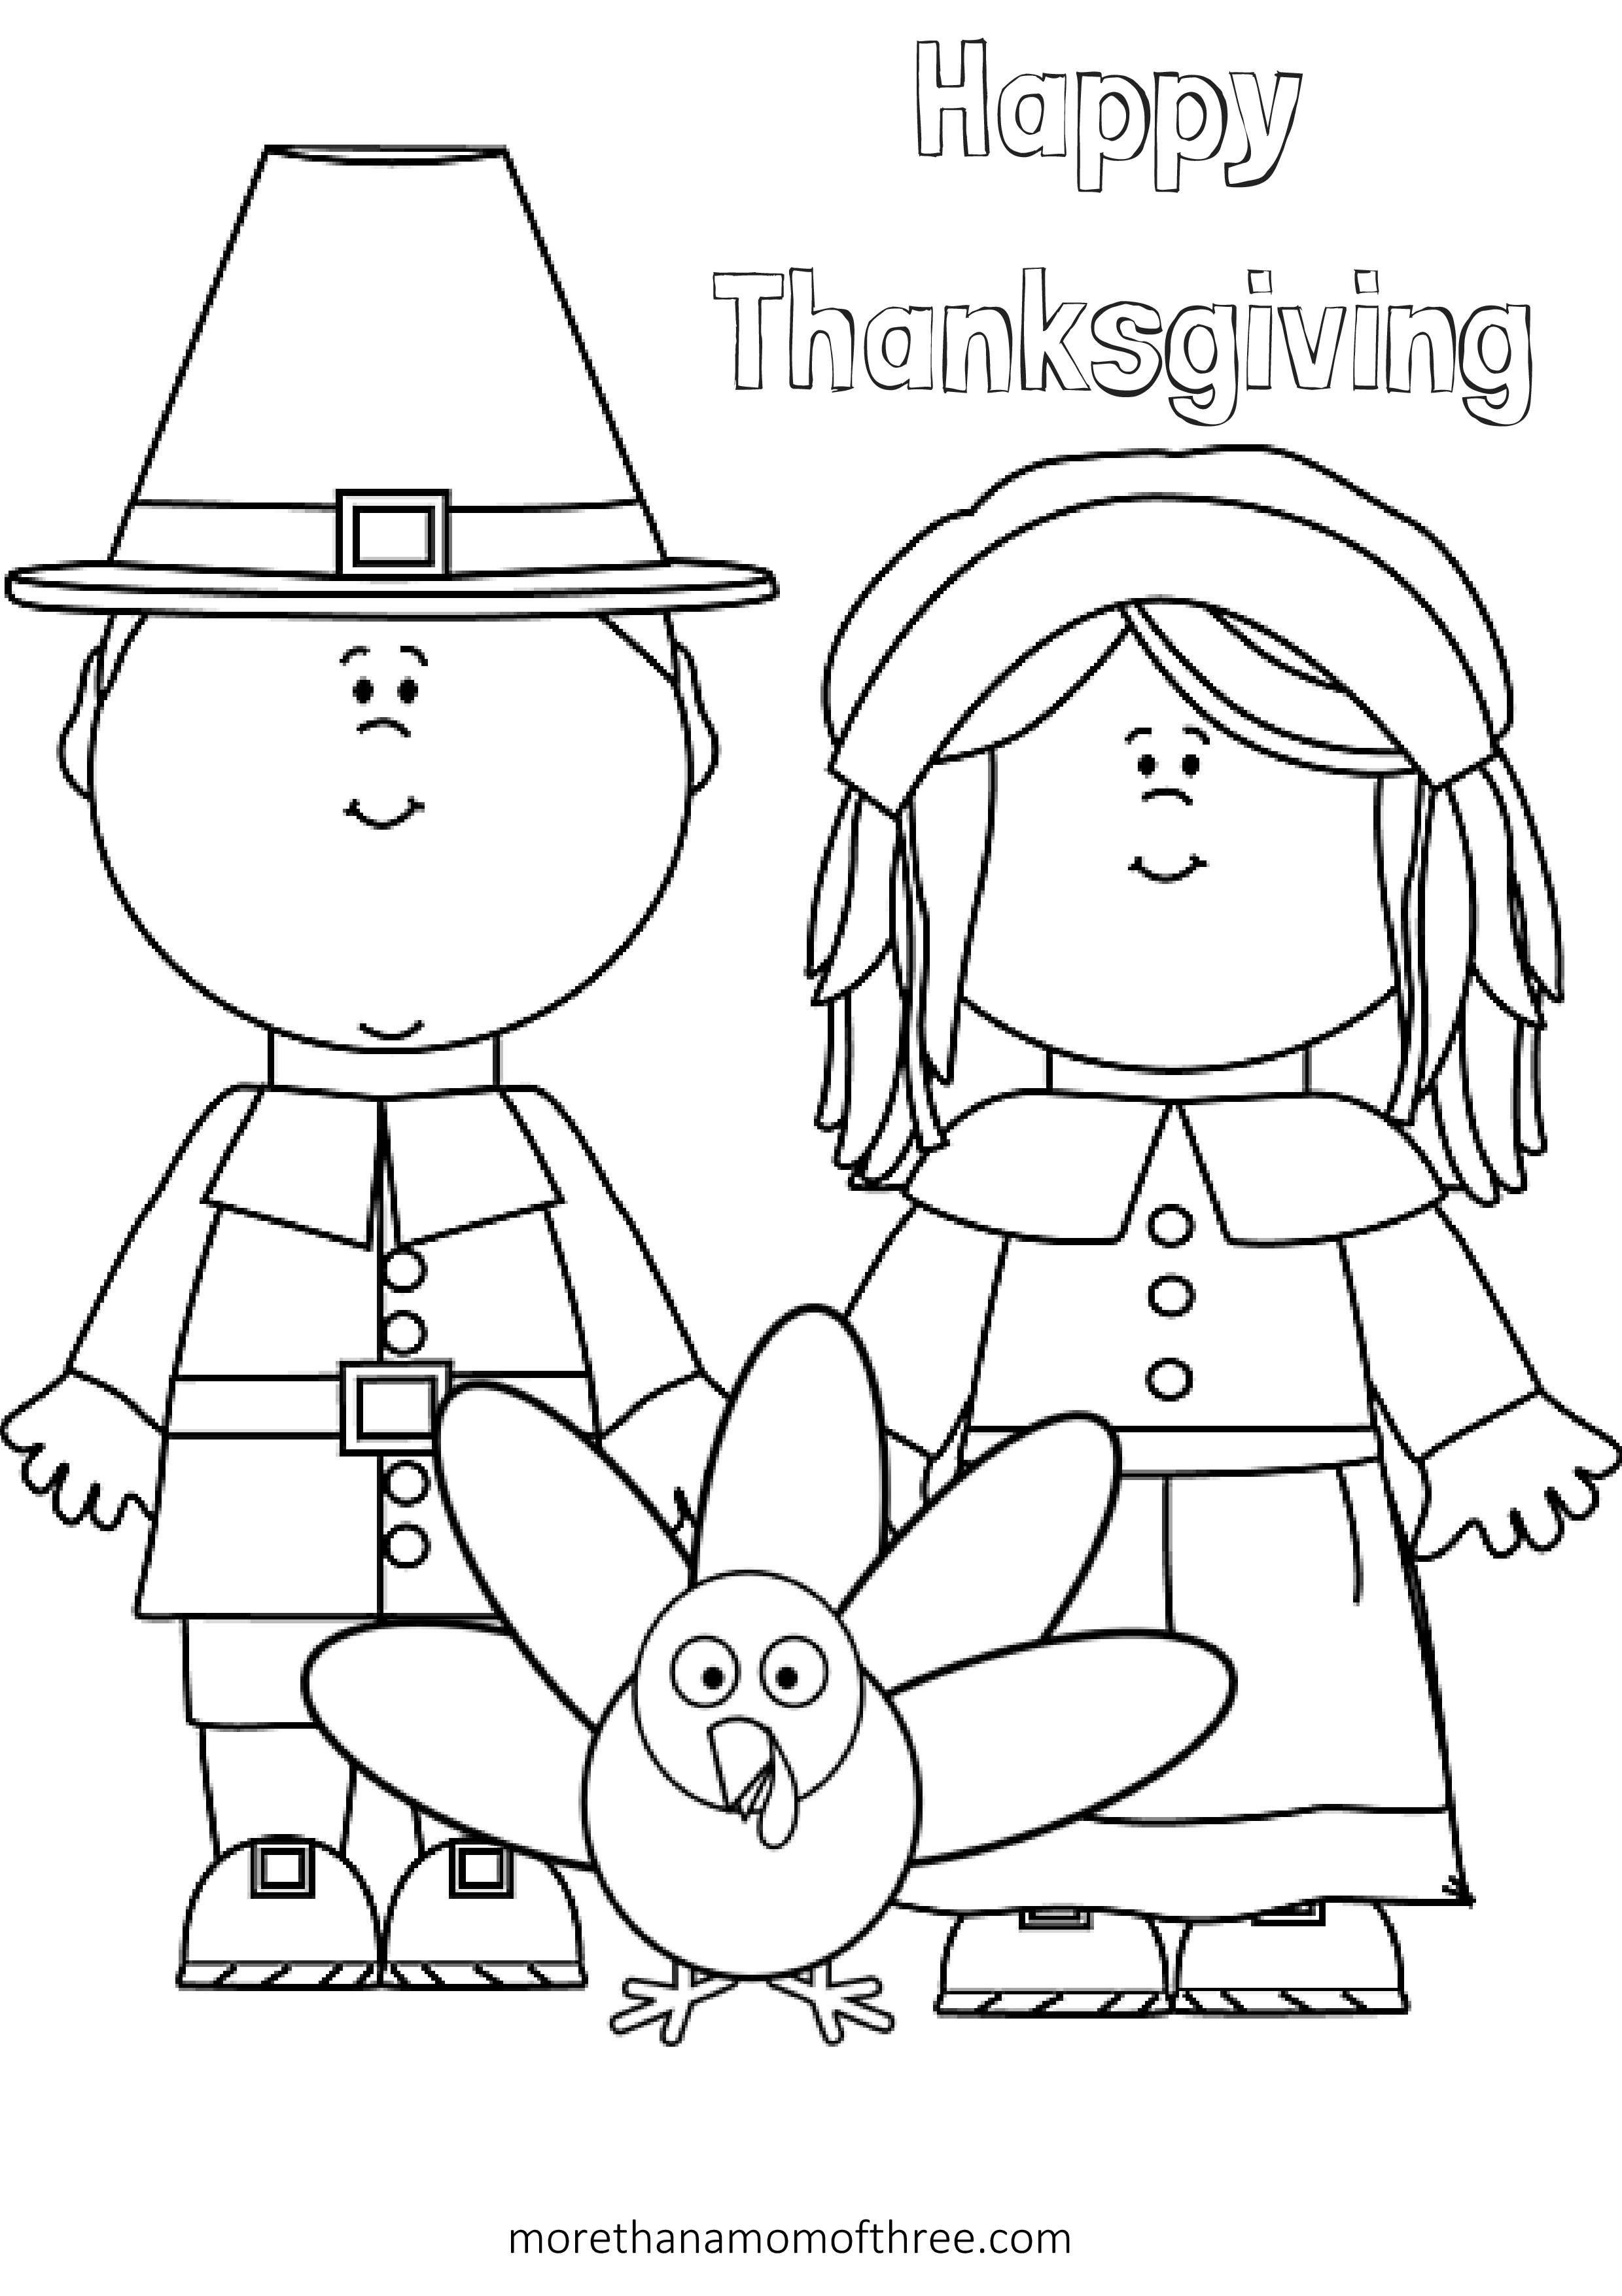 Free Thanksgiving Coloring Pages Printables For Kids | Thanksgiving - Free Printable Thanksgiving Coloring Pages